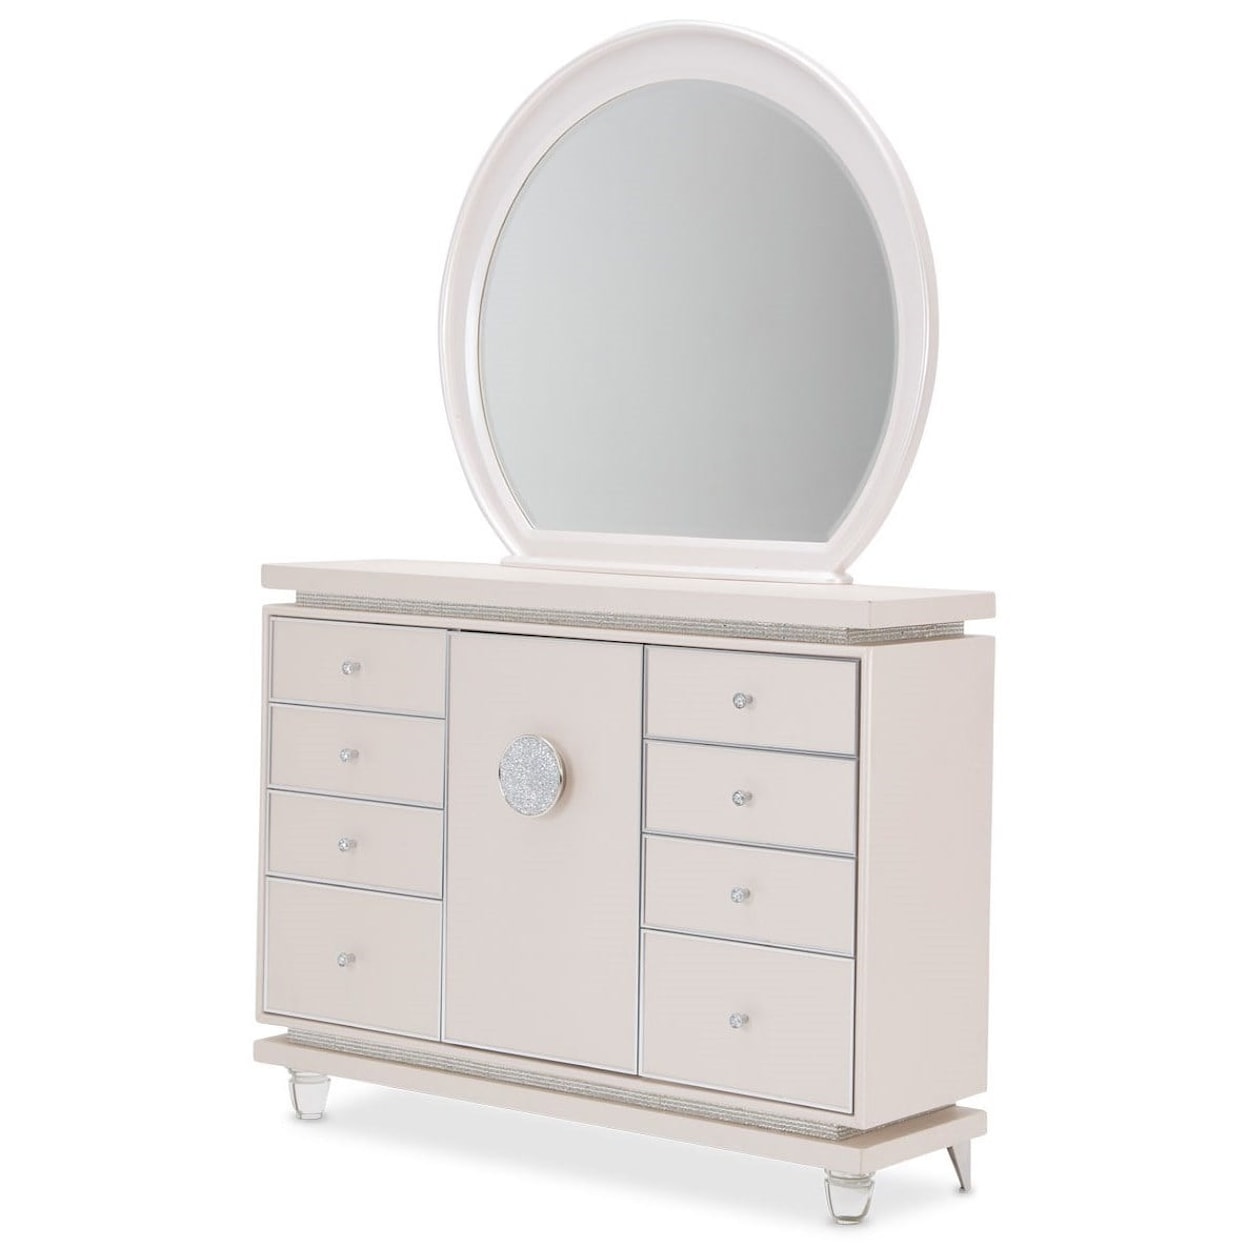 Michael Amini Glimmering Heights Upholstered 8-Drawer Dresser and Mirror Set